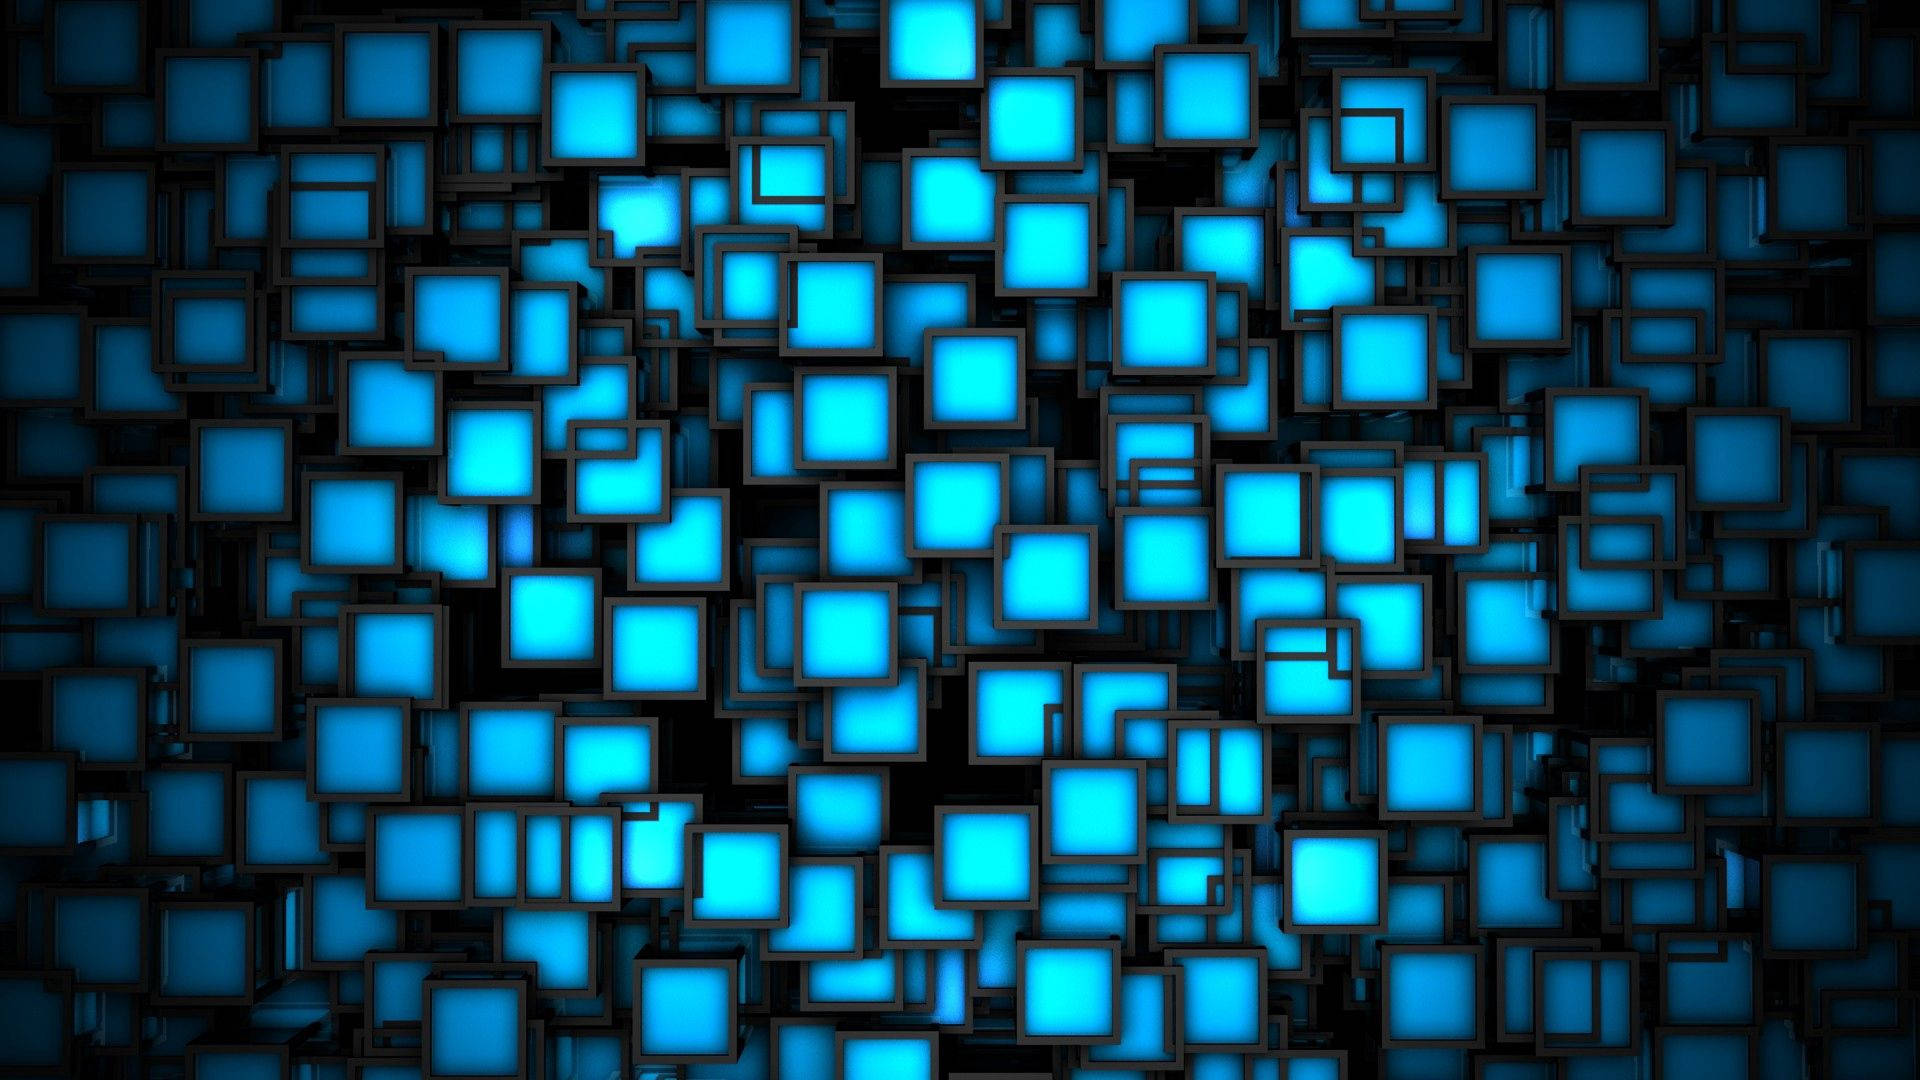 Geometric Pattern of Blue Squares and Black Background Wallpaper